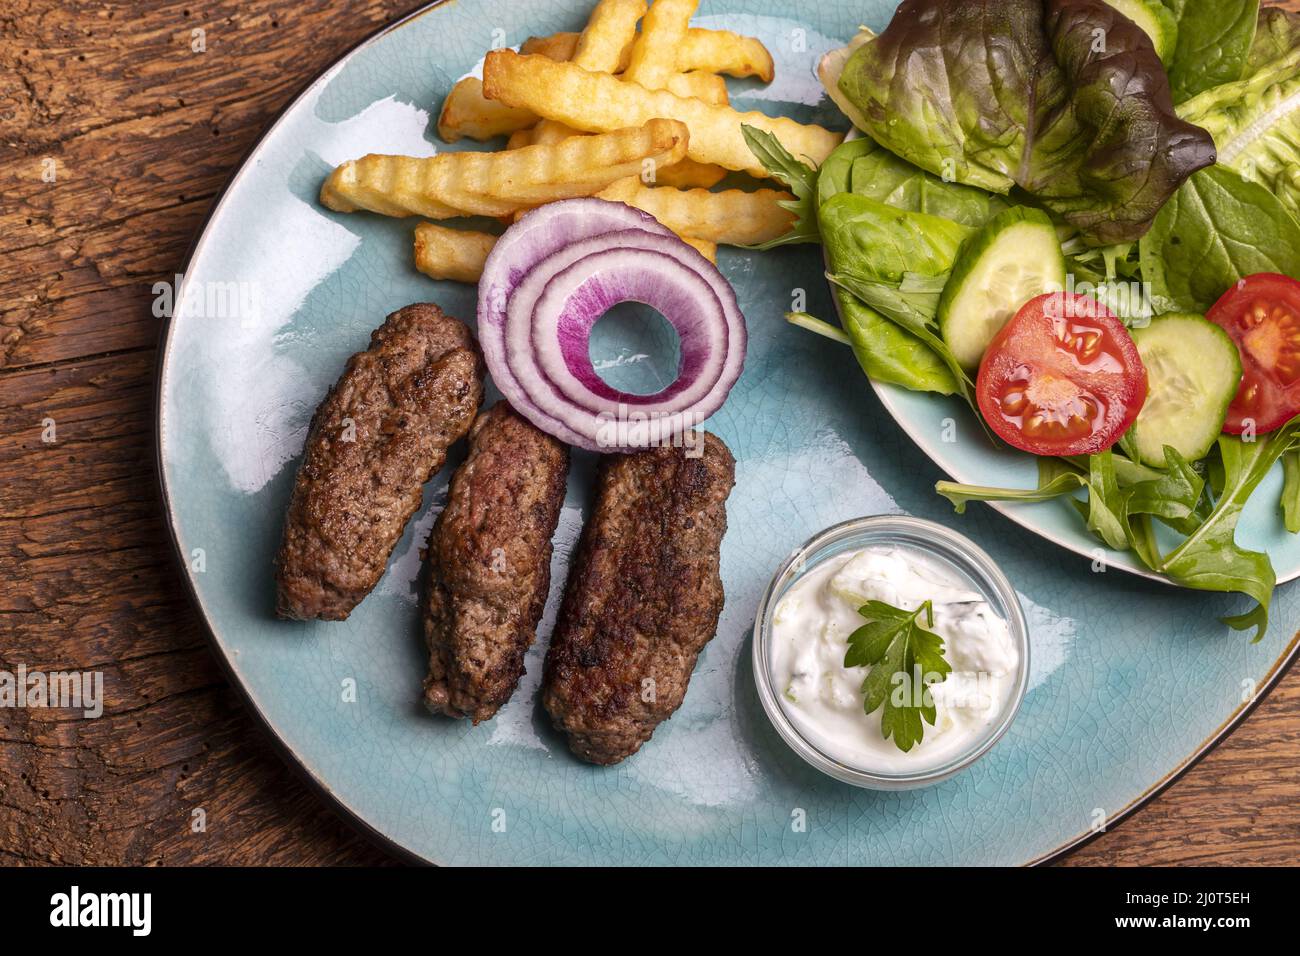 Cevapcici with french fries and salad Stock Photo